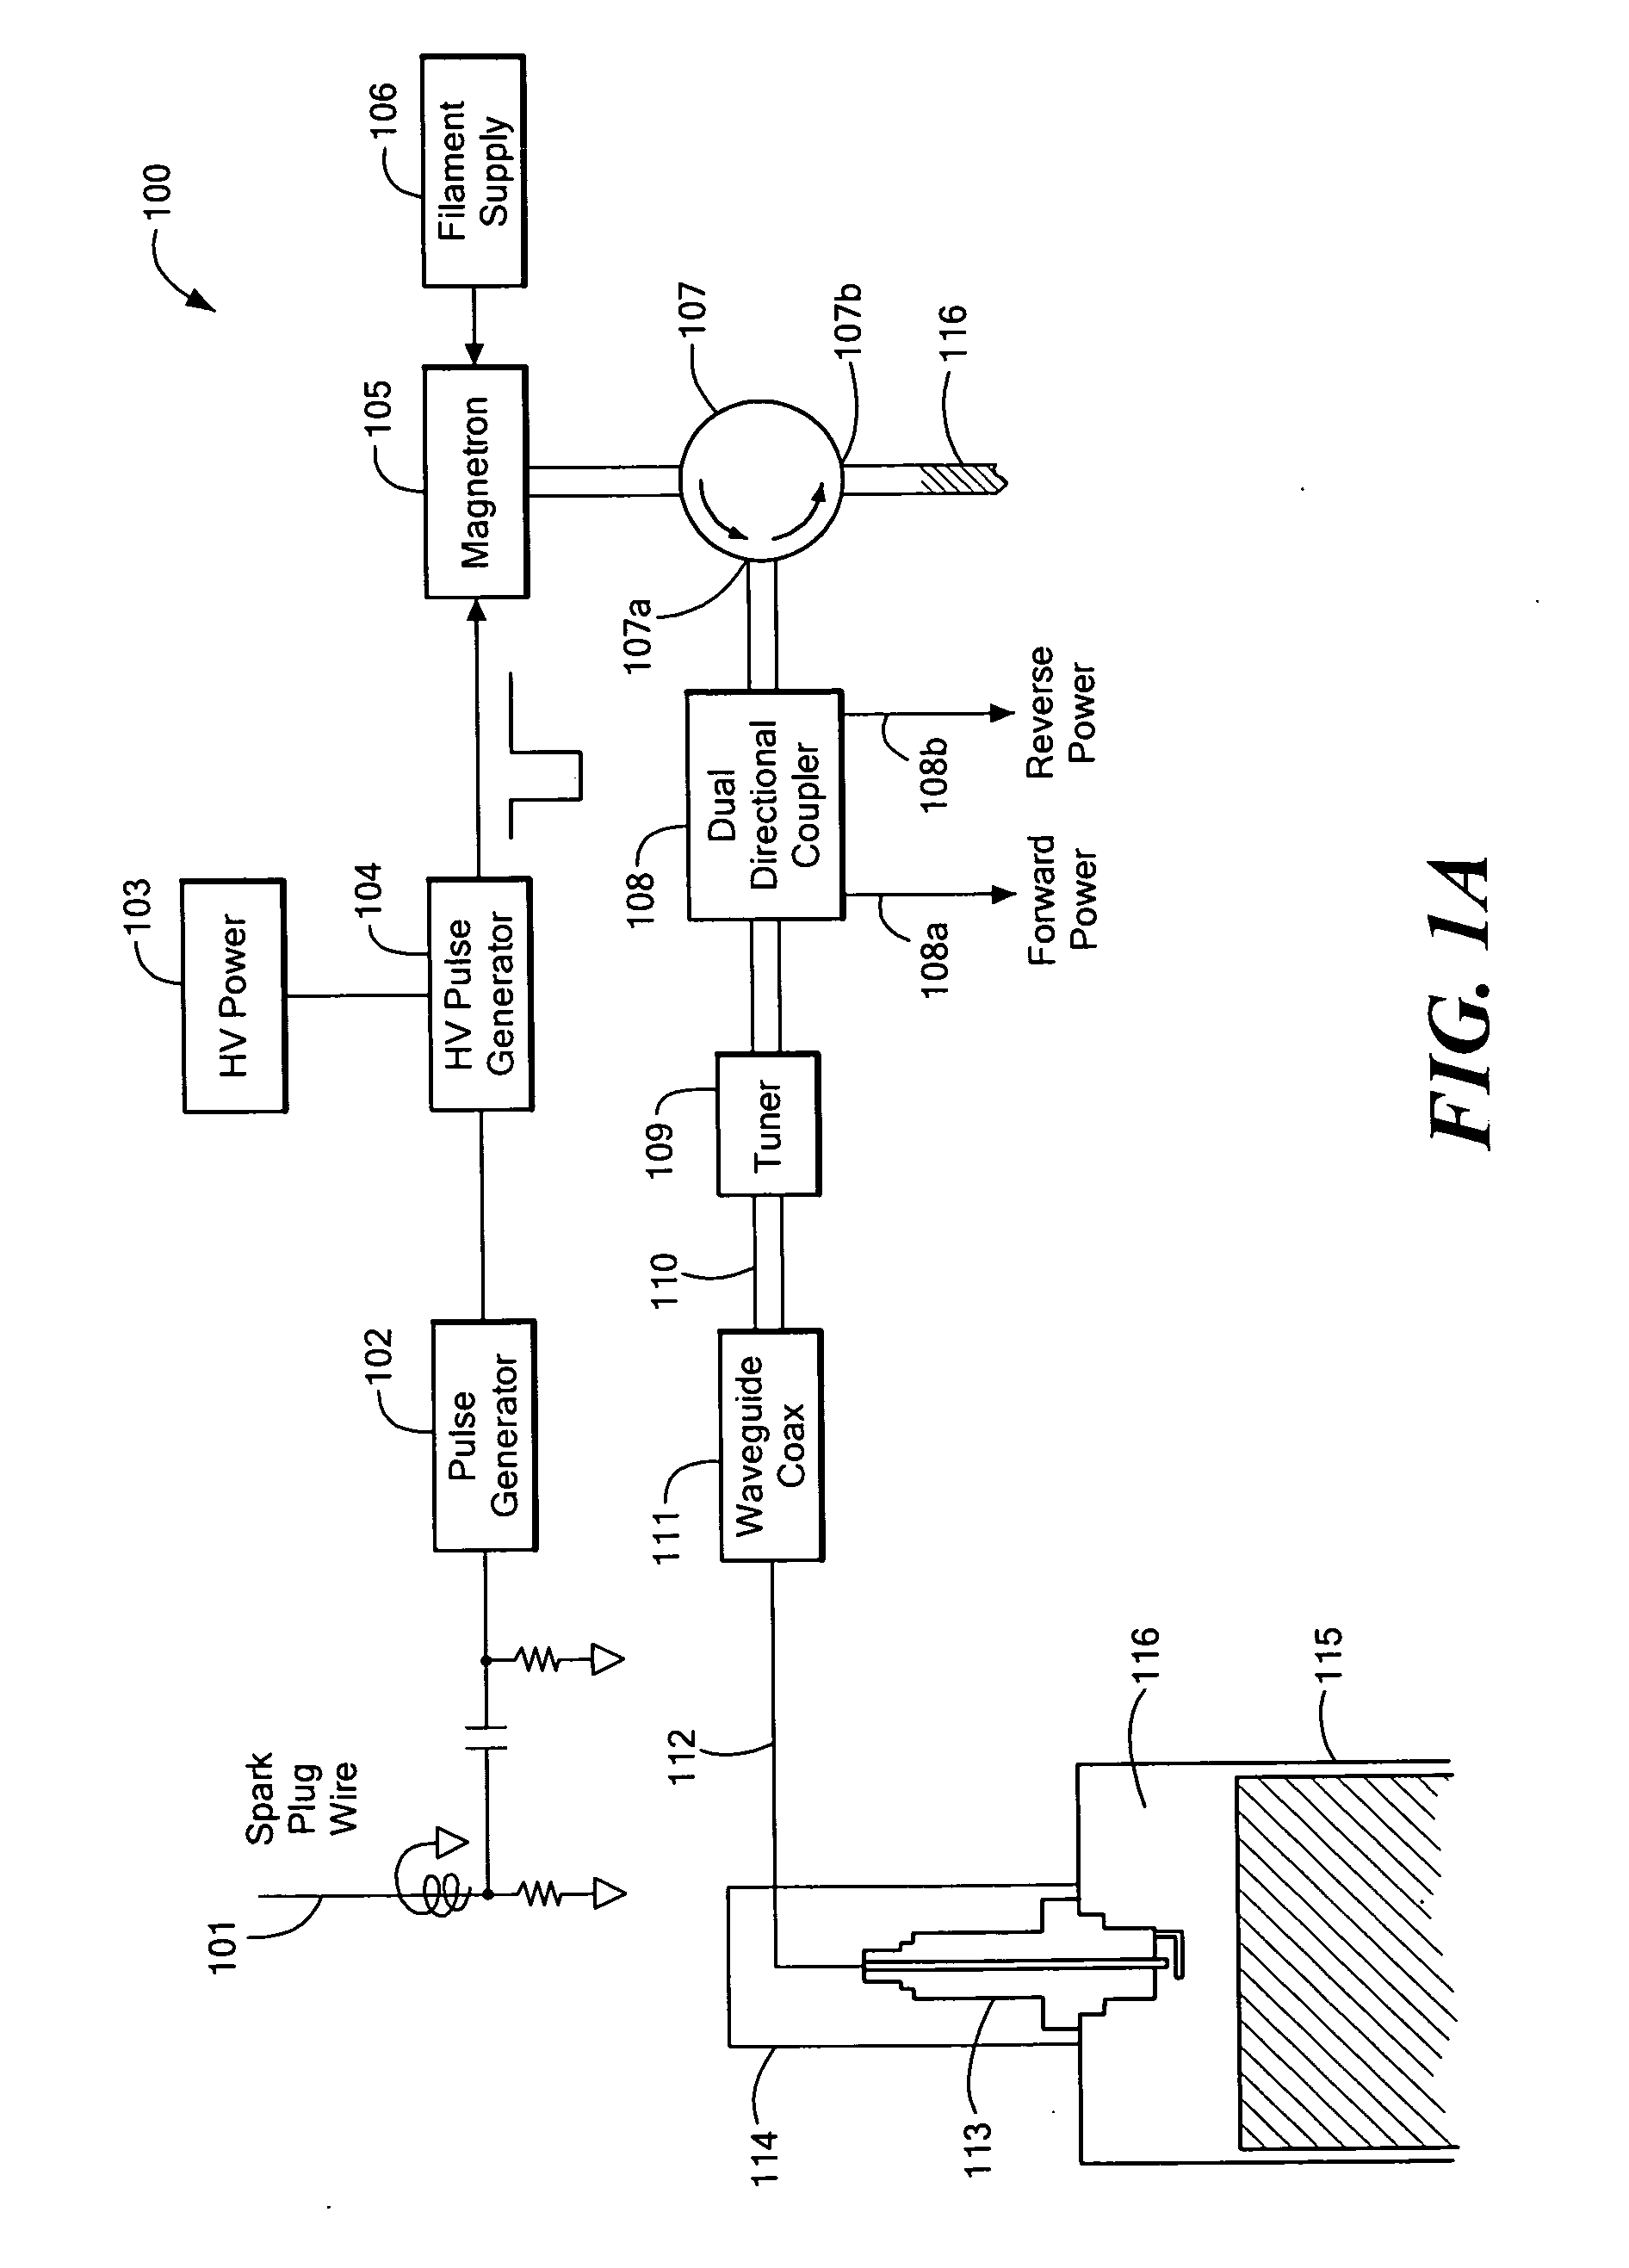 Microwave combustion system for internal combustion engines